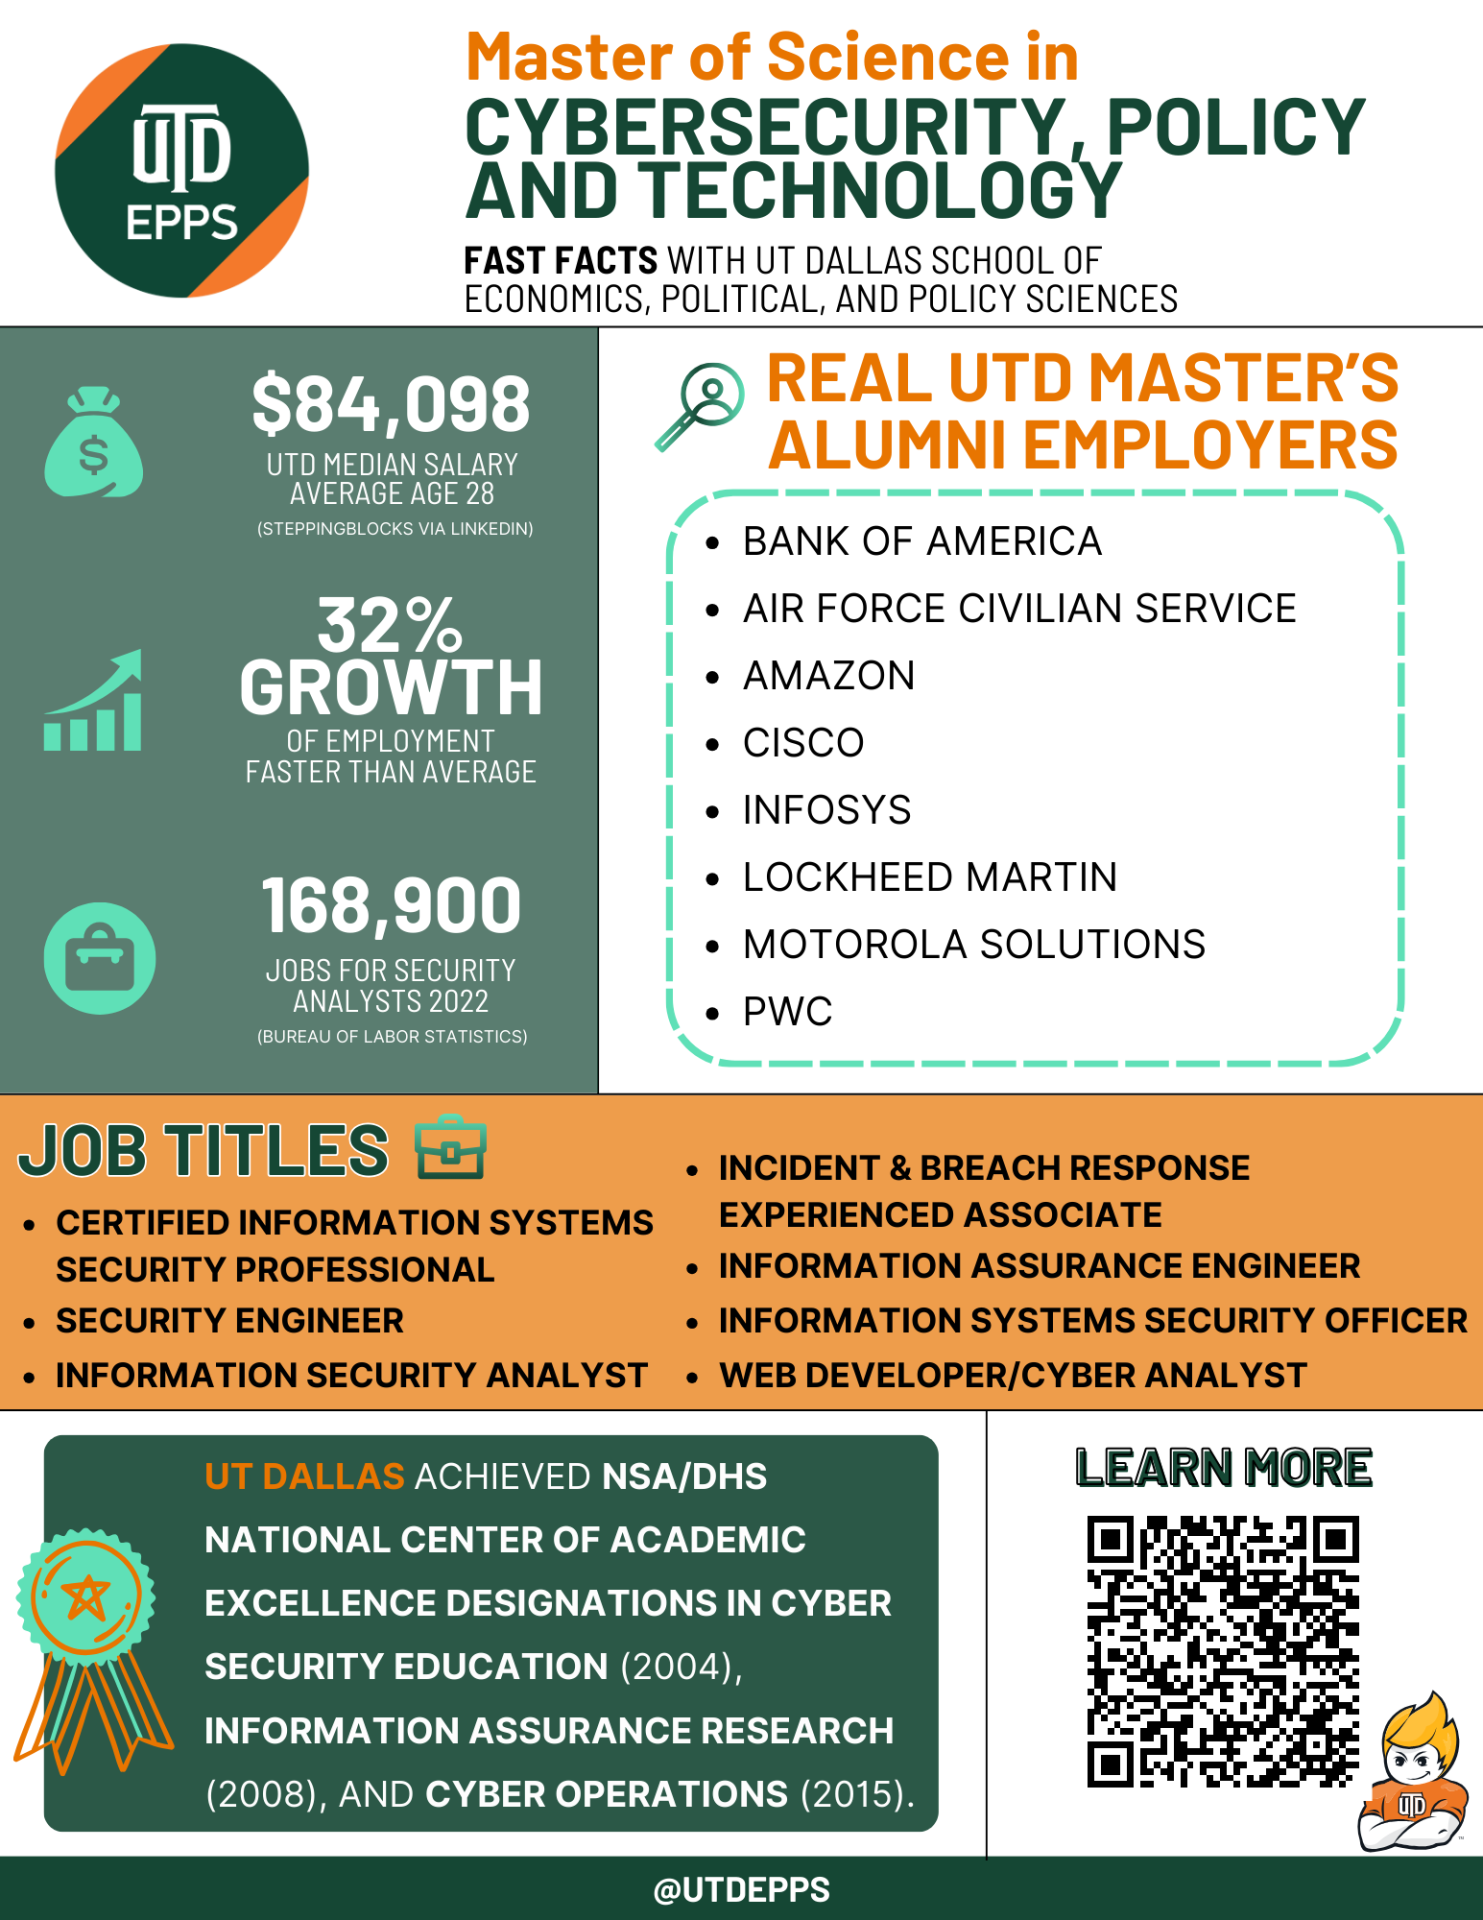 Master of Science in
Cybersecurity, policy and technology. Fast Facts with Ut Dallas school of 
economics, political, and policy sciences

REAL UTD MASTER’S ALUMNI EMPLOYERS:
Bank of America
Air Force Civilian Service
Amazon 
Cisco
Infosys
Lockheed Martin
Motorola Solutions
PWC

,098 is the UTD Median Salary
(Average age 28) Data is from STEPPINGBLOCKS VIA LINKEDIN. 32% Growth OF EMPLOYMENT which is FASTER THAN AVERAGE.
168,900 Jobs for SECURITY ANALYSTS 2022. Data is from the BUREAU OF LABOR STATISTICS. 

UT Dallas achieved NSA/DHS National Center of Academic Excellence designations in Cyber Security Education (2004), Information Assurance Research (2008), and Cyber Operations (2015).

Job titles include:
Certified Information Systems Security Professional
Security Engineer
Information Security Analyst
Incident & Breach Response Experienced Associate
Information Assurance Engineer
Information Systems Security Officer
Web Developer/Cyber Analyst

Learn more by scanning the QR code.

@UTDEPPS.